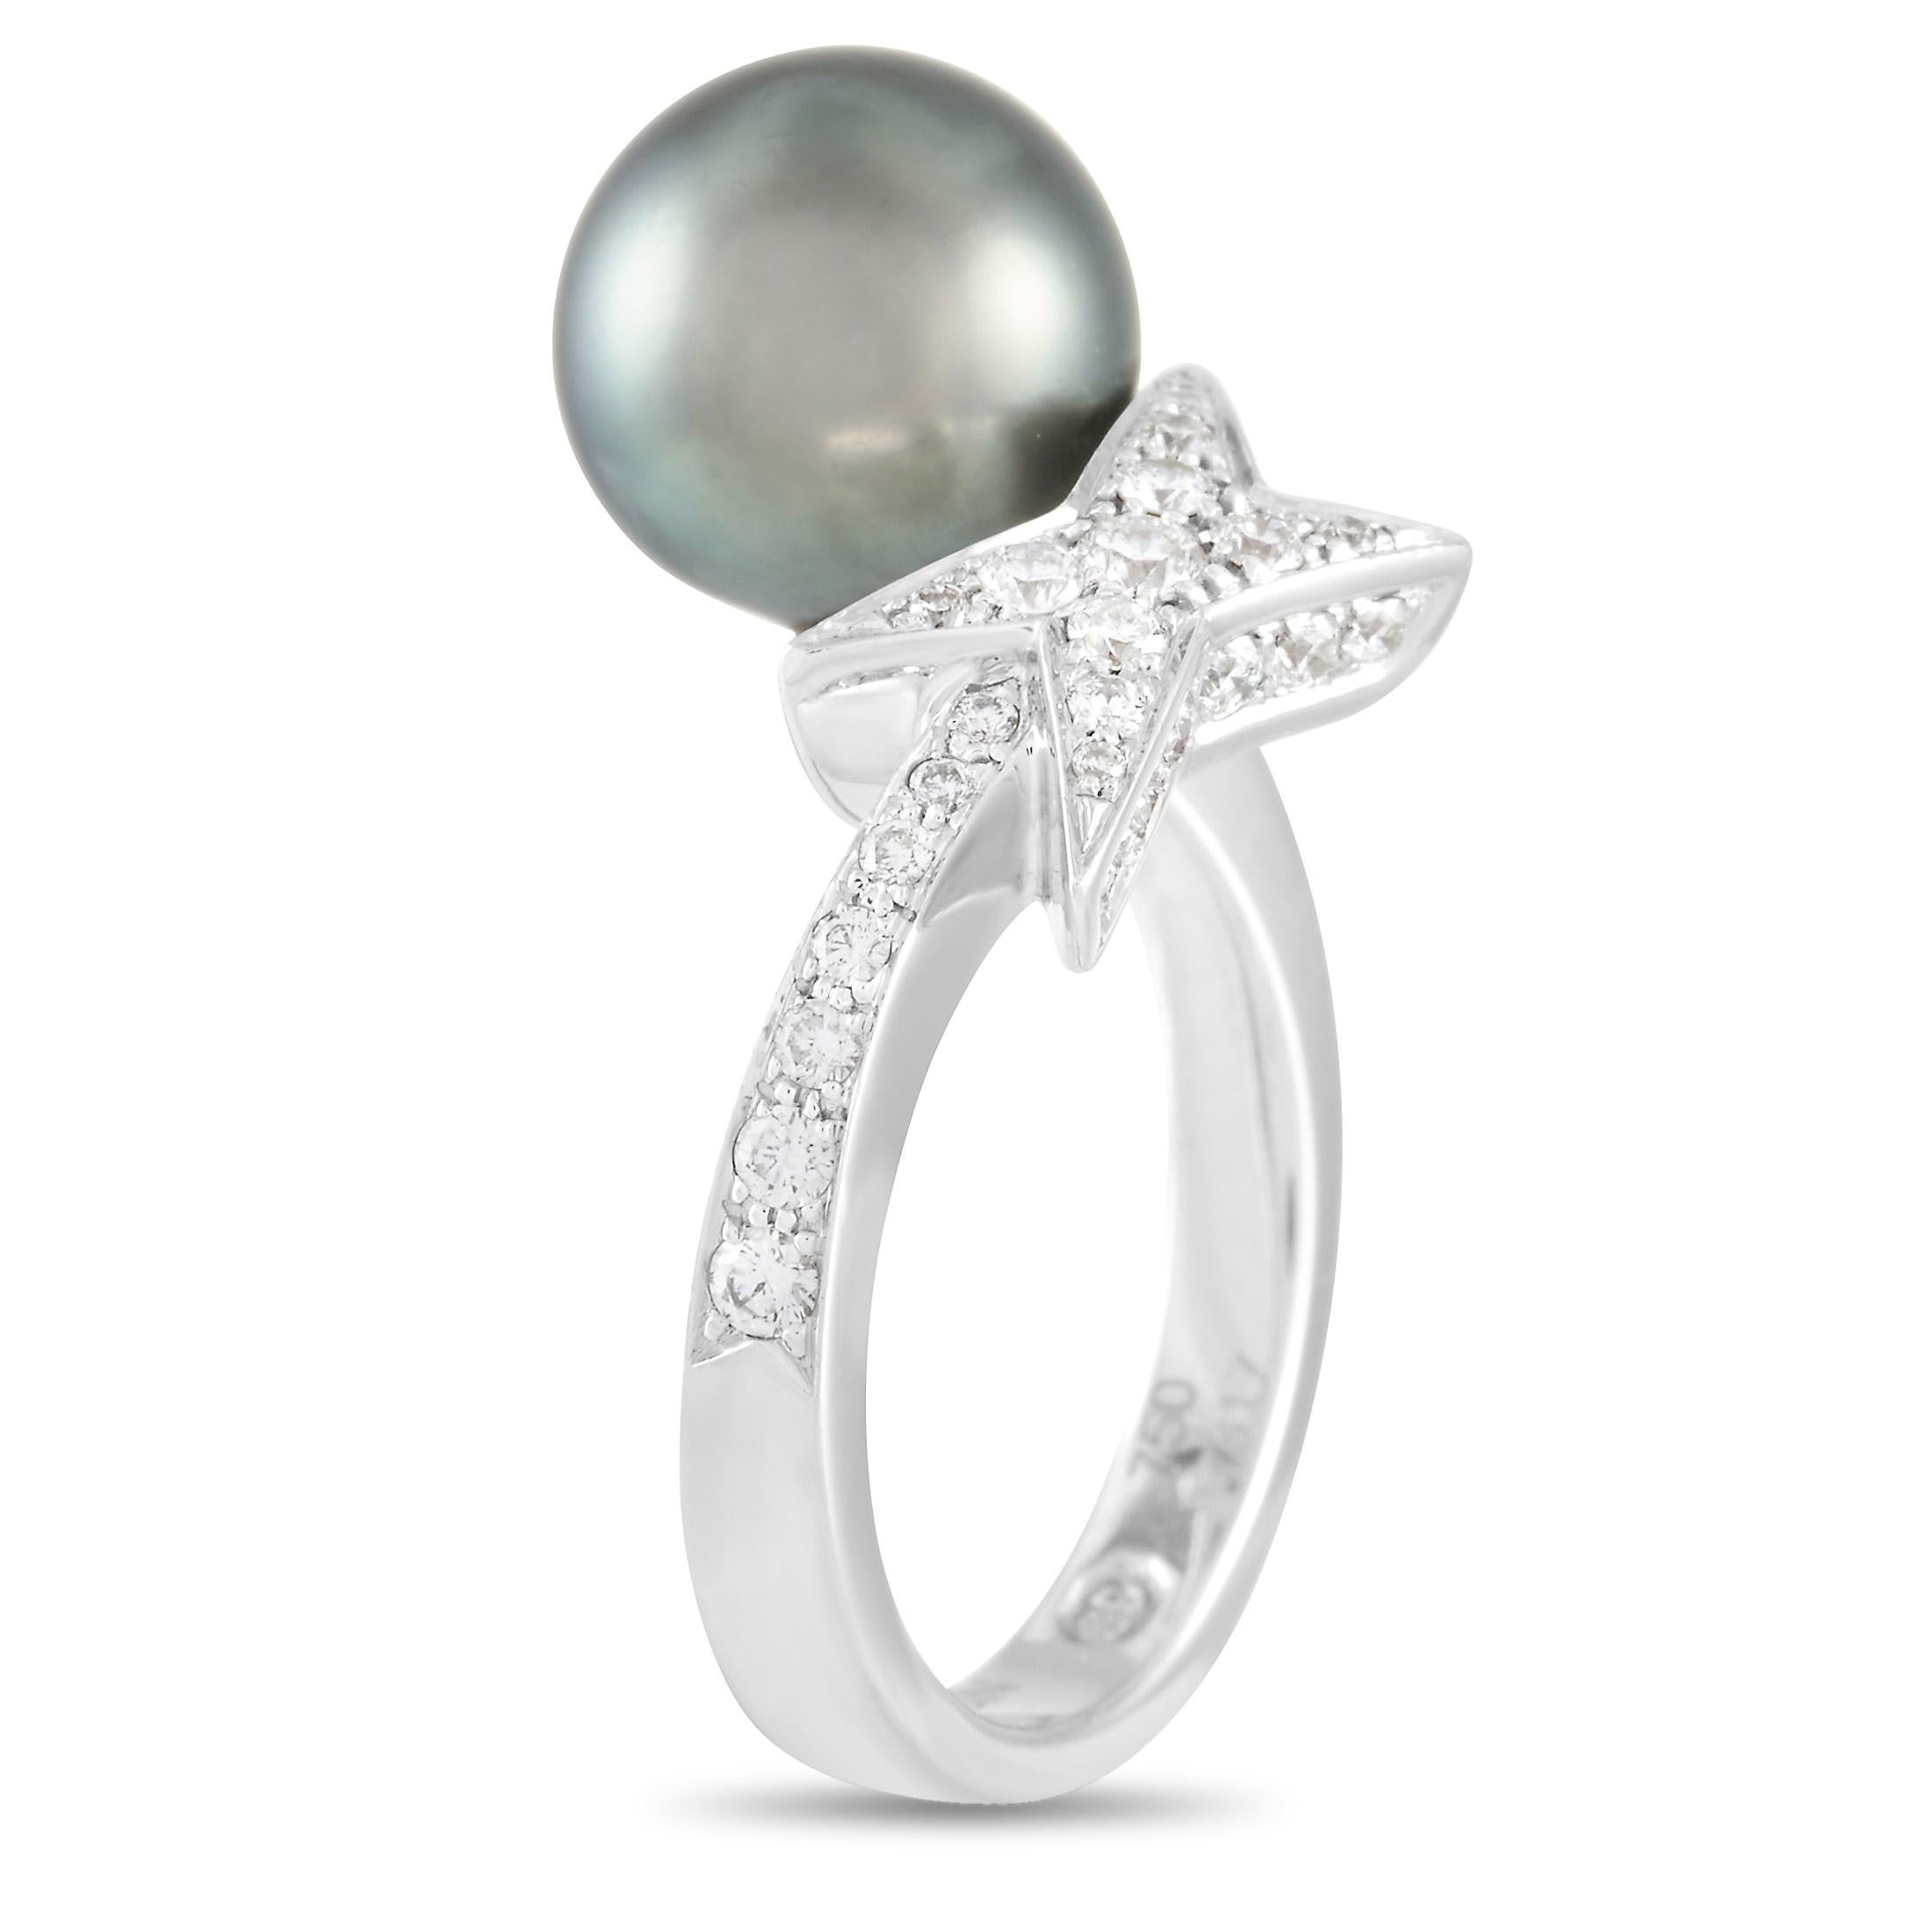 Sweep her off her feet with the sparkling elegance of this Mauboussin 18K White Gold Diamond and Pearl Ring. Designed with a bypass shank, one end of this ring leads to a sparkling star with diamonds in pavé setting while the other end features a